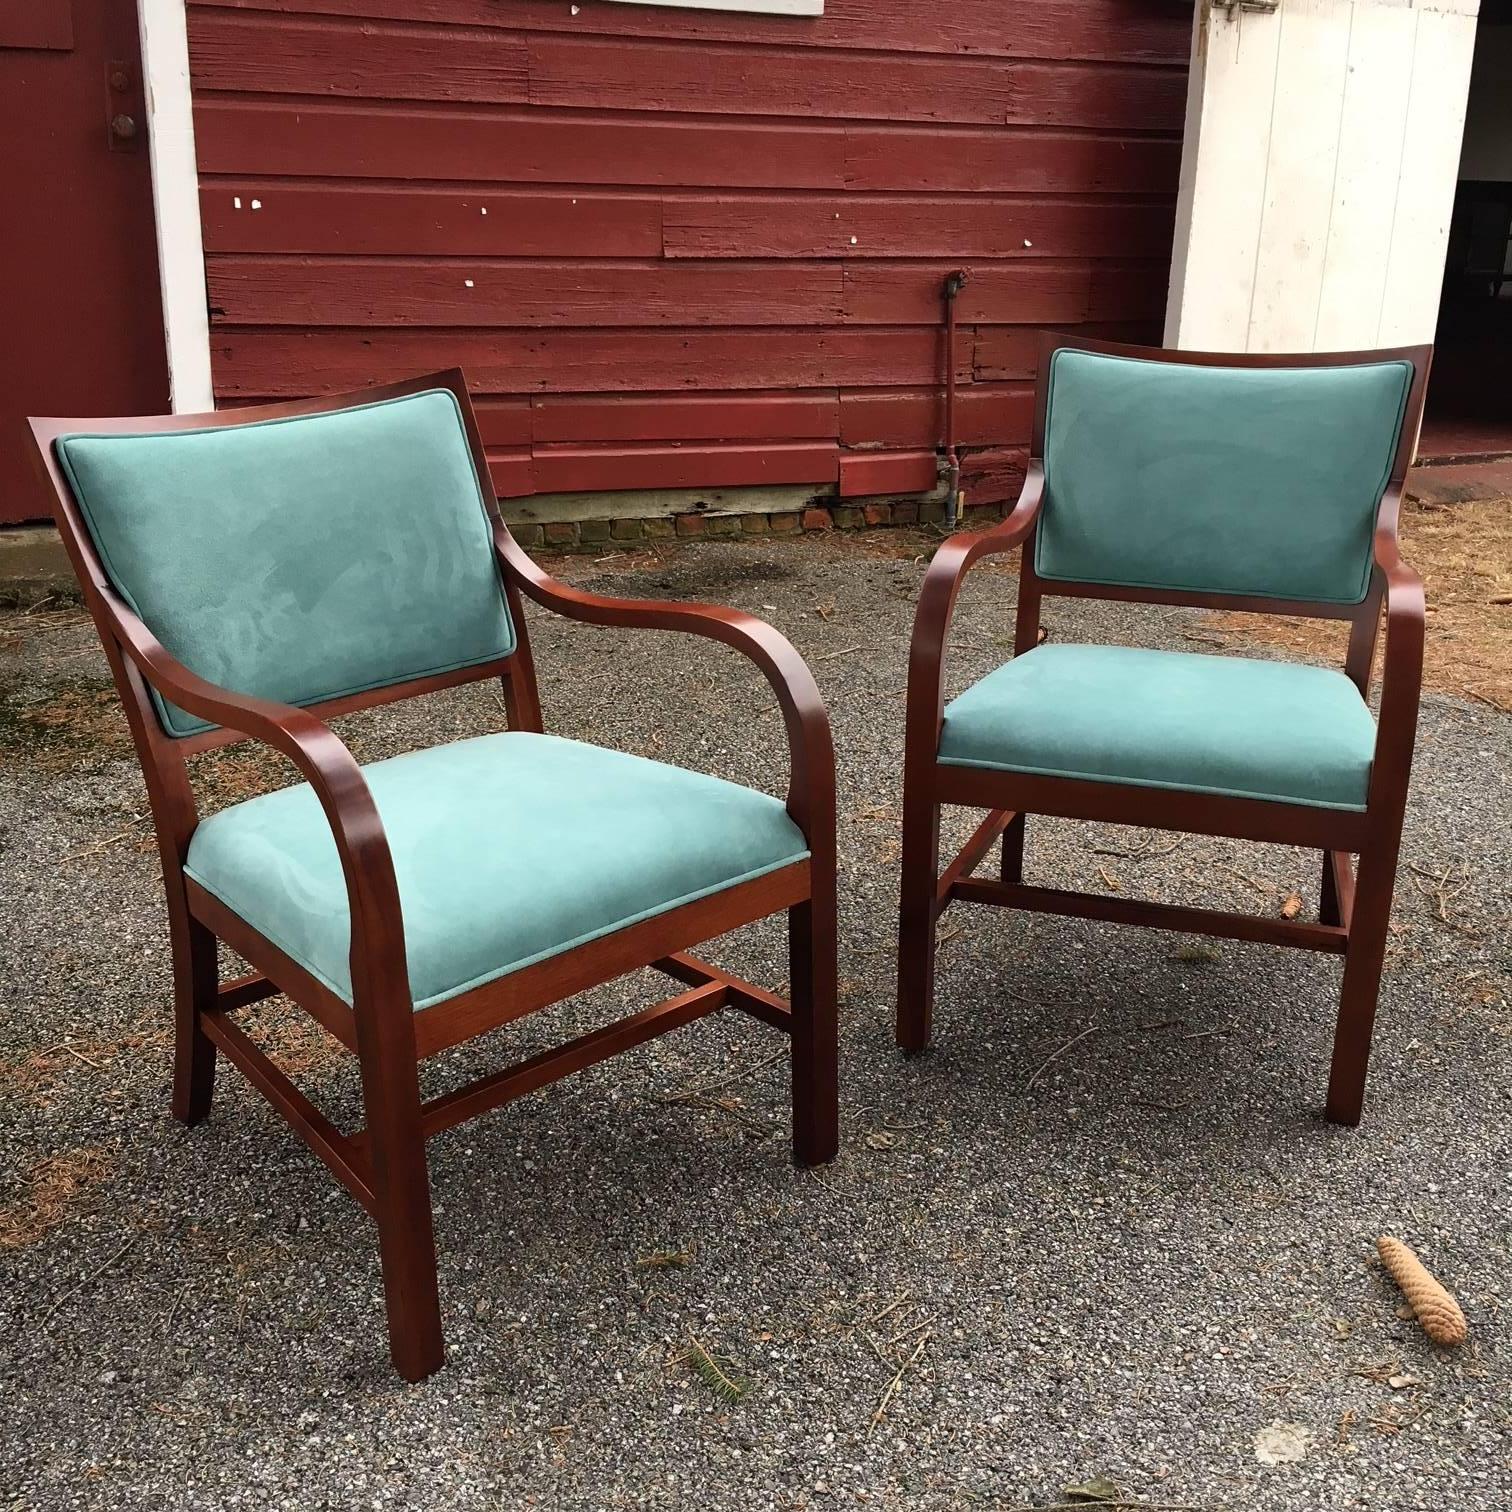 Fabulous pair of early 20th century Danish modern occasional chairs in the manner of Frits Henningsen. Ca. 1940.  

Wonderful sexy iconic swing to the arms and stunning unusual curved back, with high quality tight grain mahogany offset by Holly Hunt